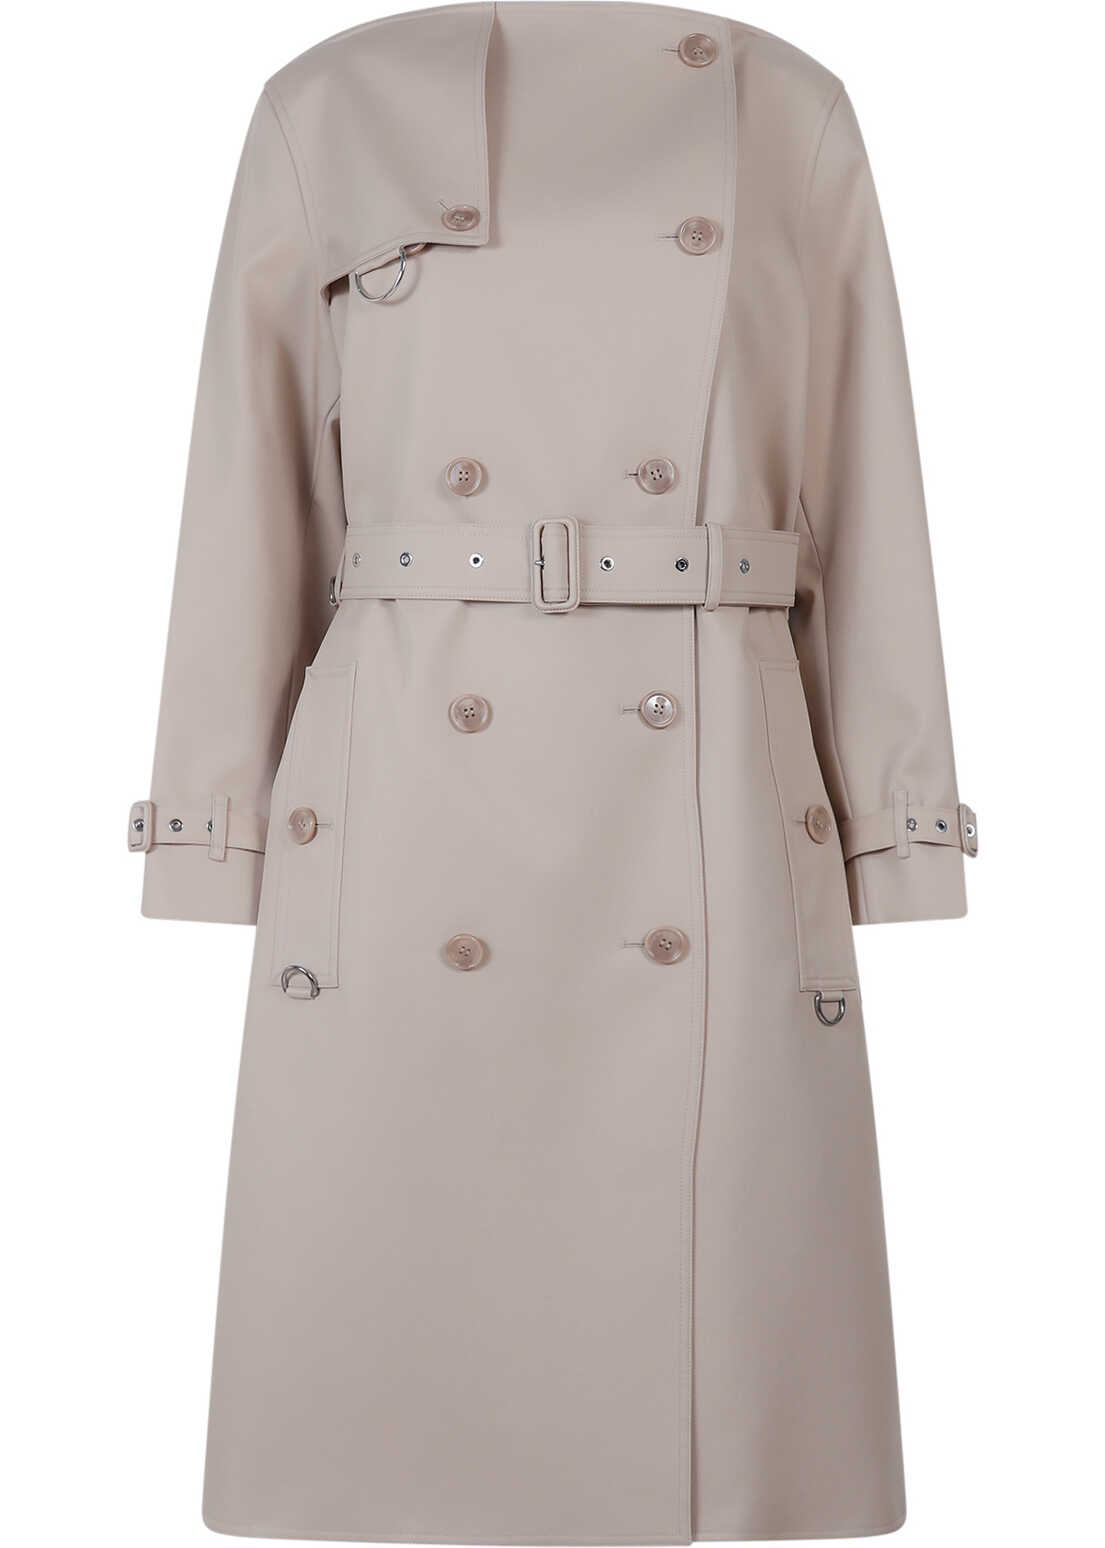 Burberry Trench Beige image15